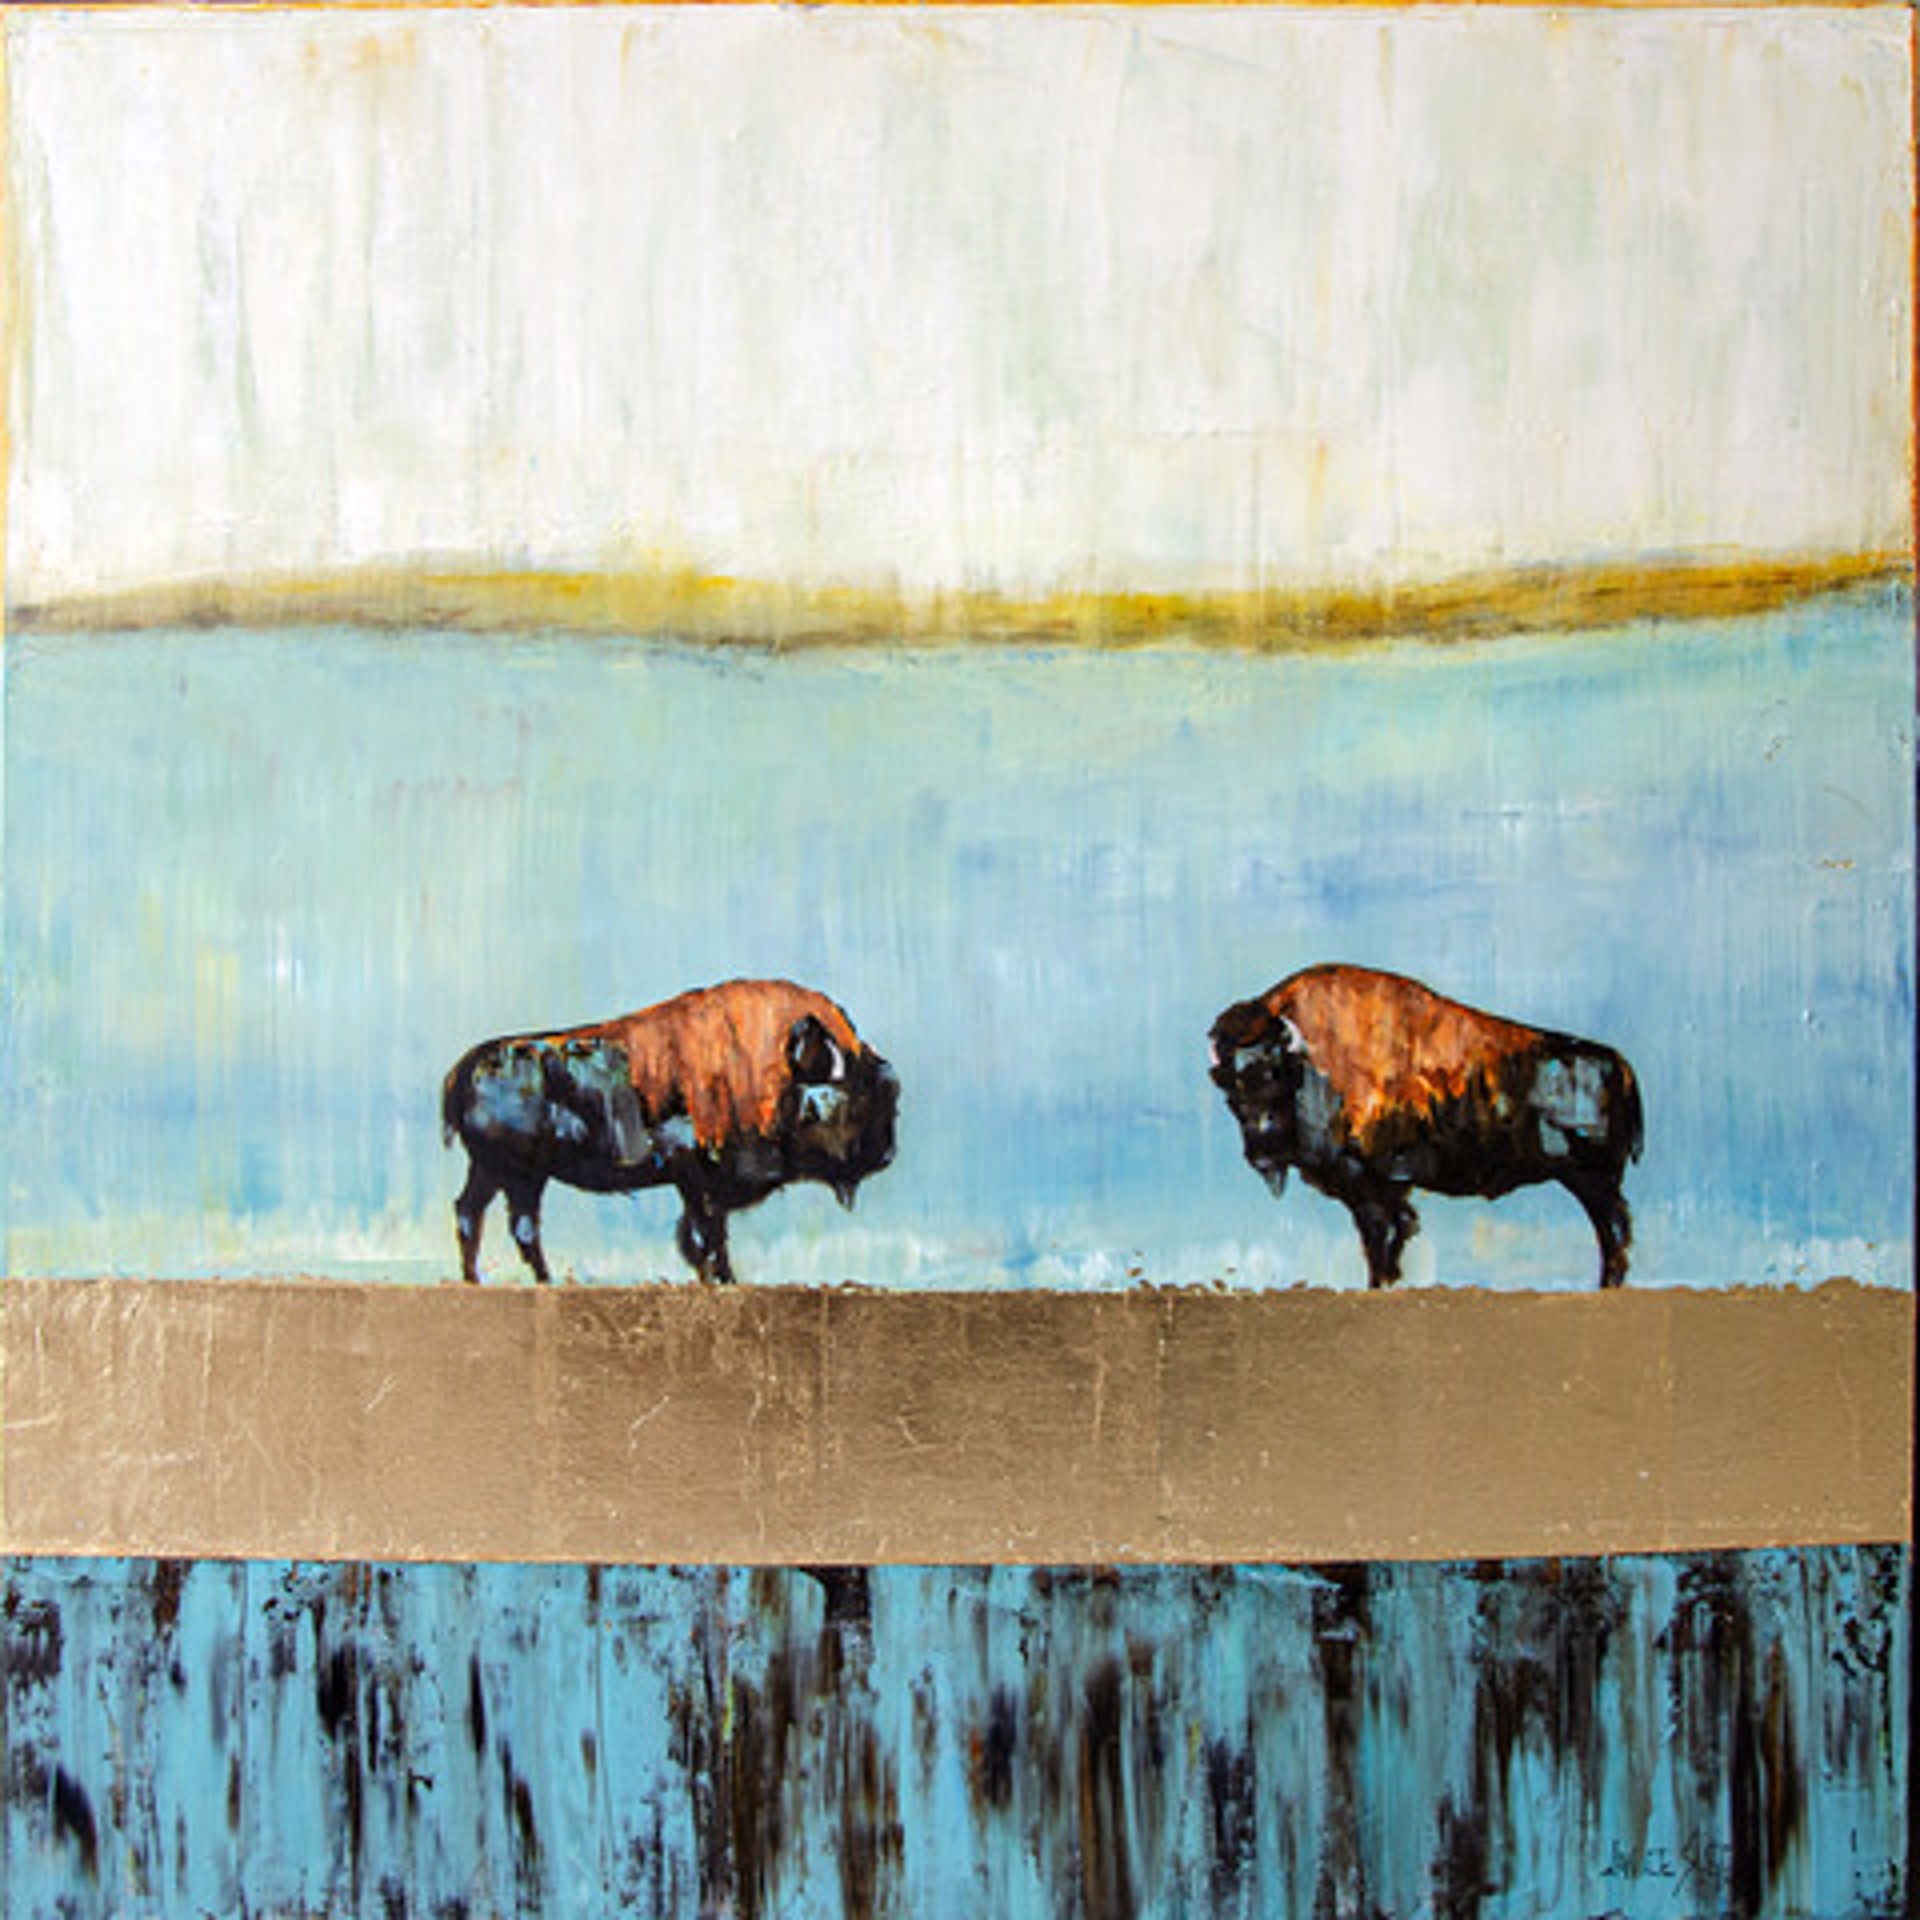 Bison on a Golden Pond by Janice SUGG